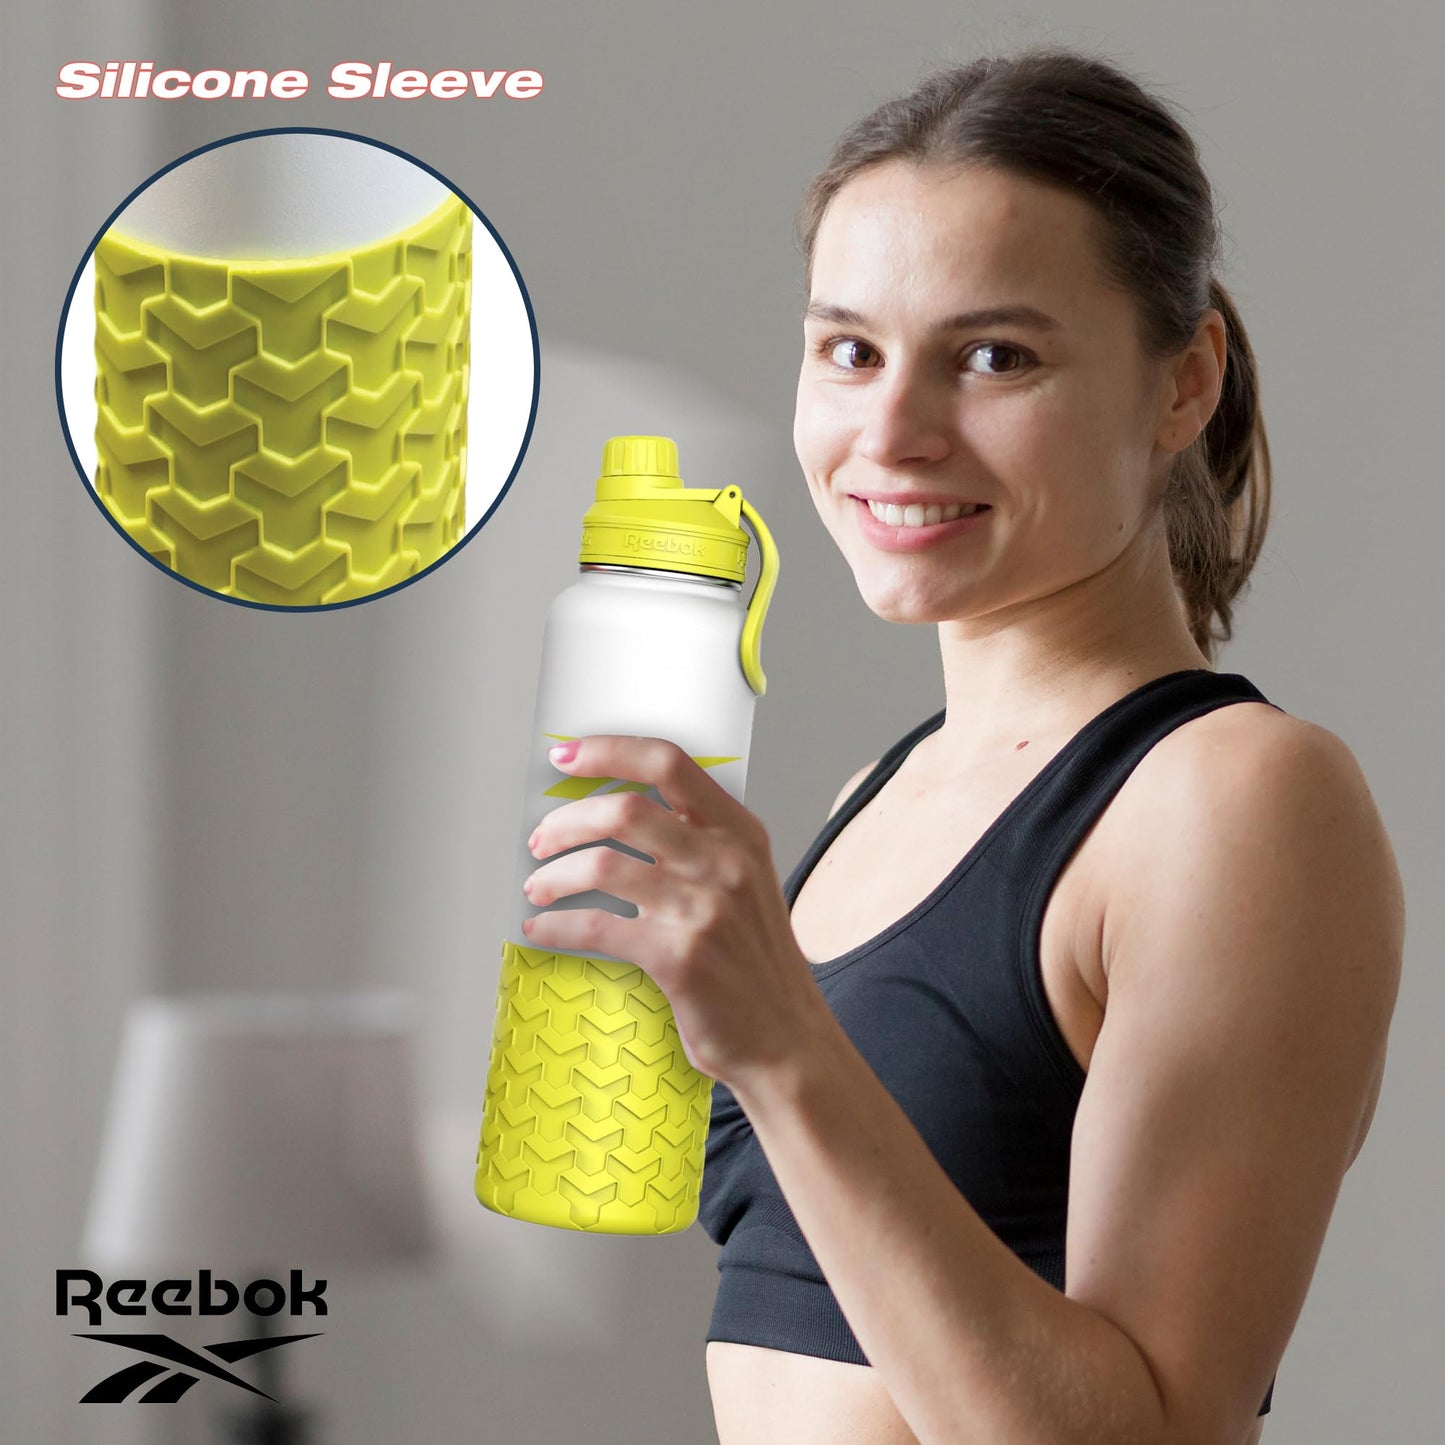 Reebok Stainless Steel Sports Water Bottle With Chug Lid - 40 oz